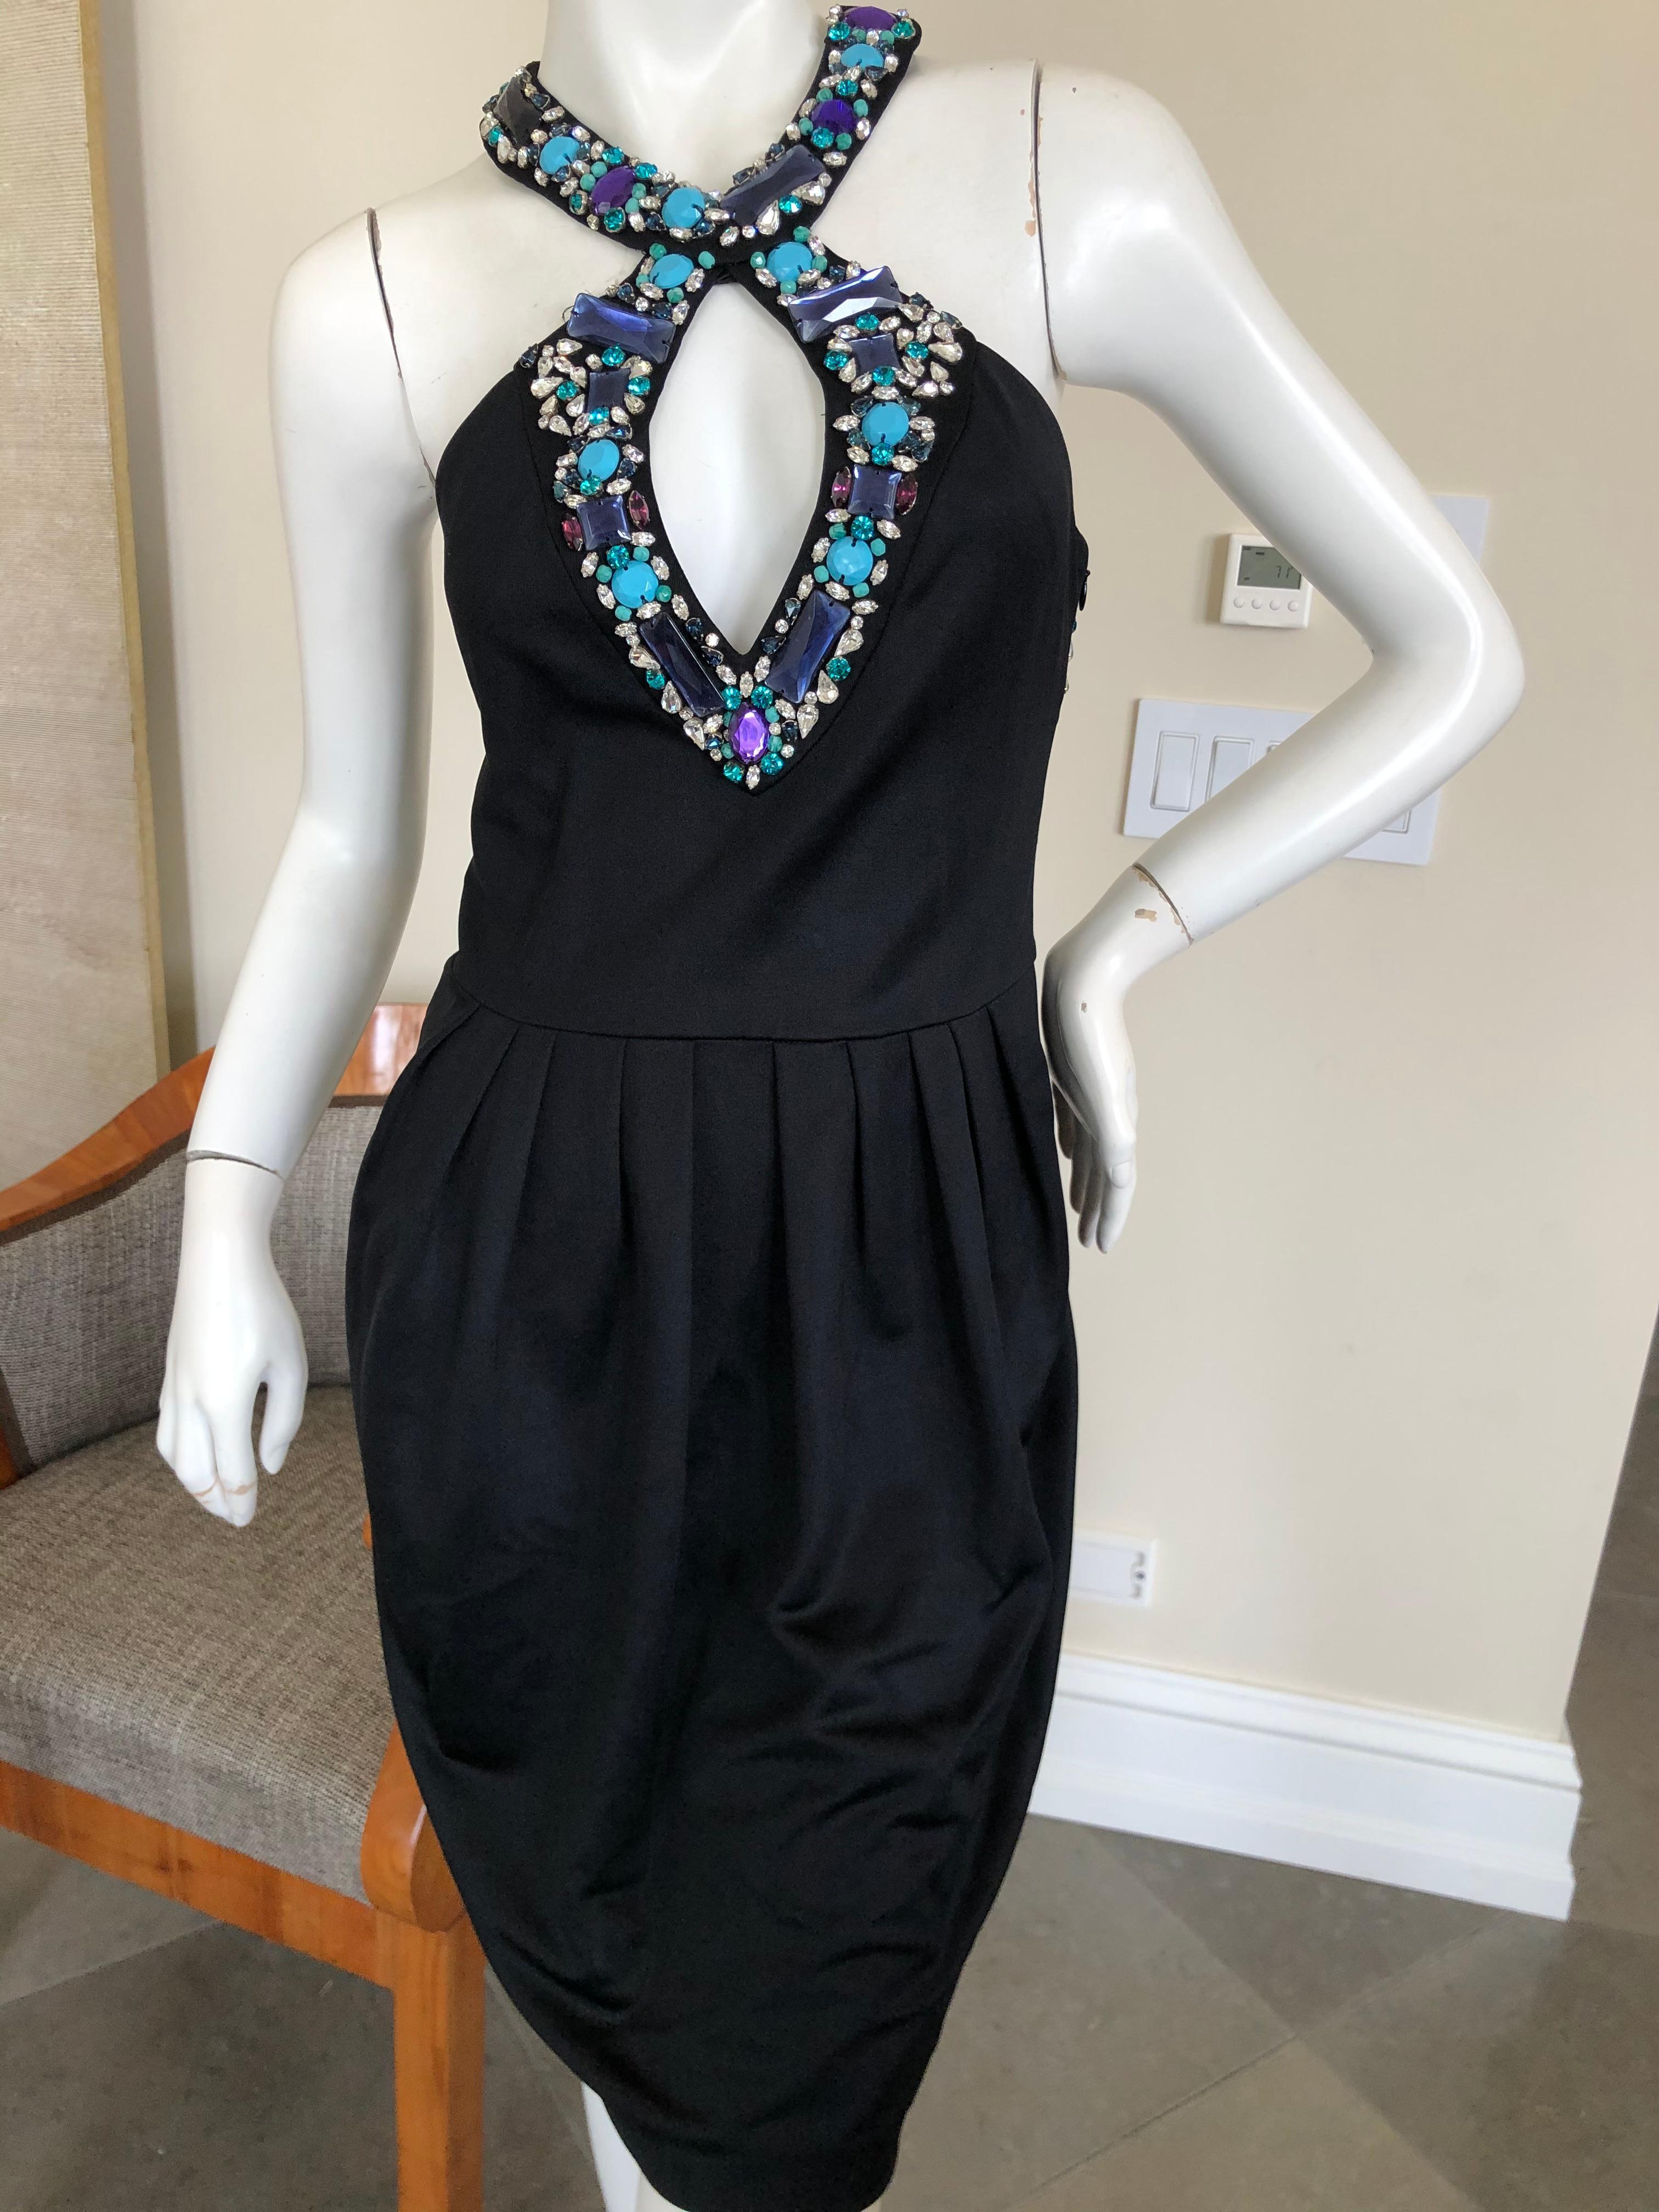 Emilio Pucci Sexy Little Black Dress w Gobsmacking Jewel Embellishments
  So pretty , please use the zoom feature to see details.
Size 2-4 (no size label)
Bust 34